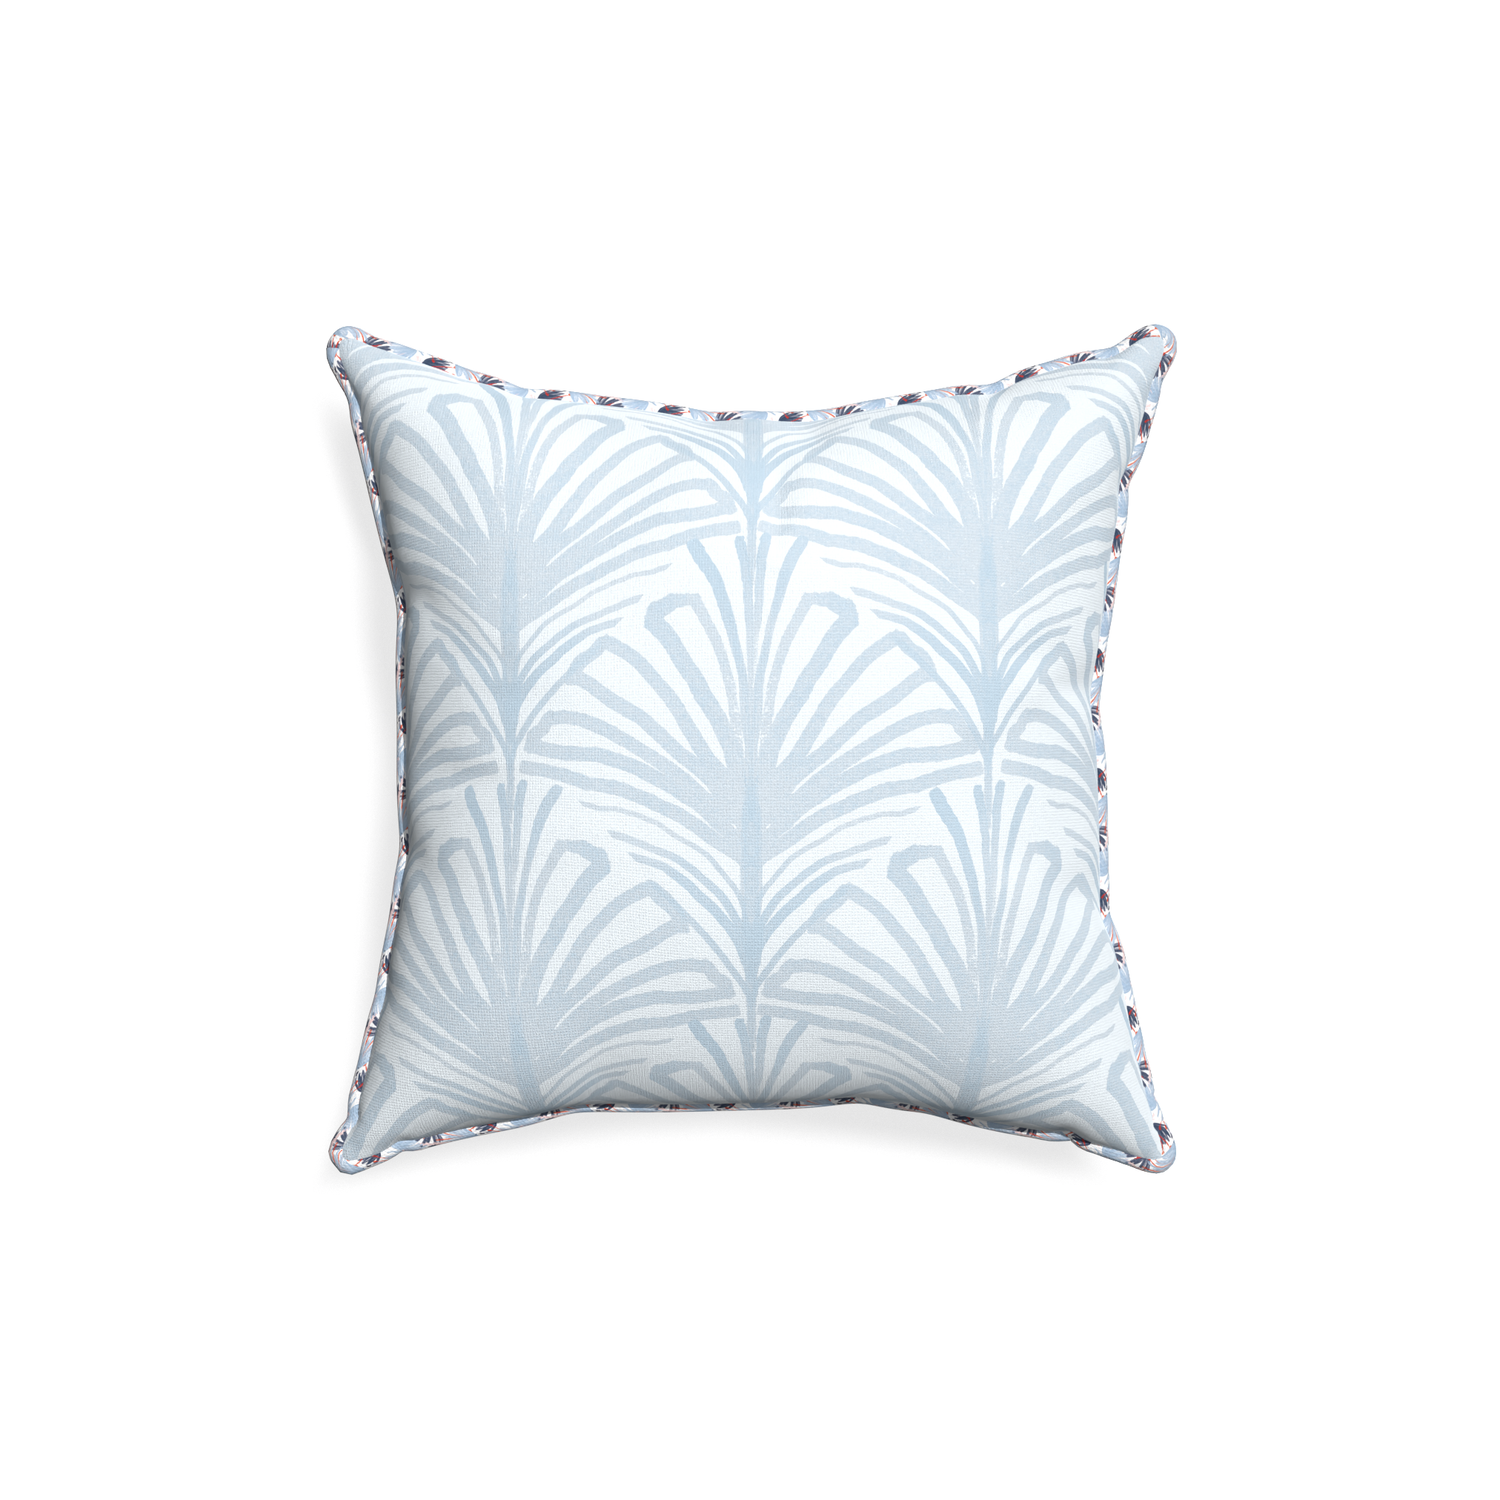 18-square suzy sky custom pillow with e piping on white background